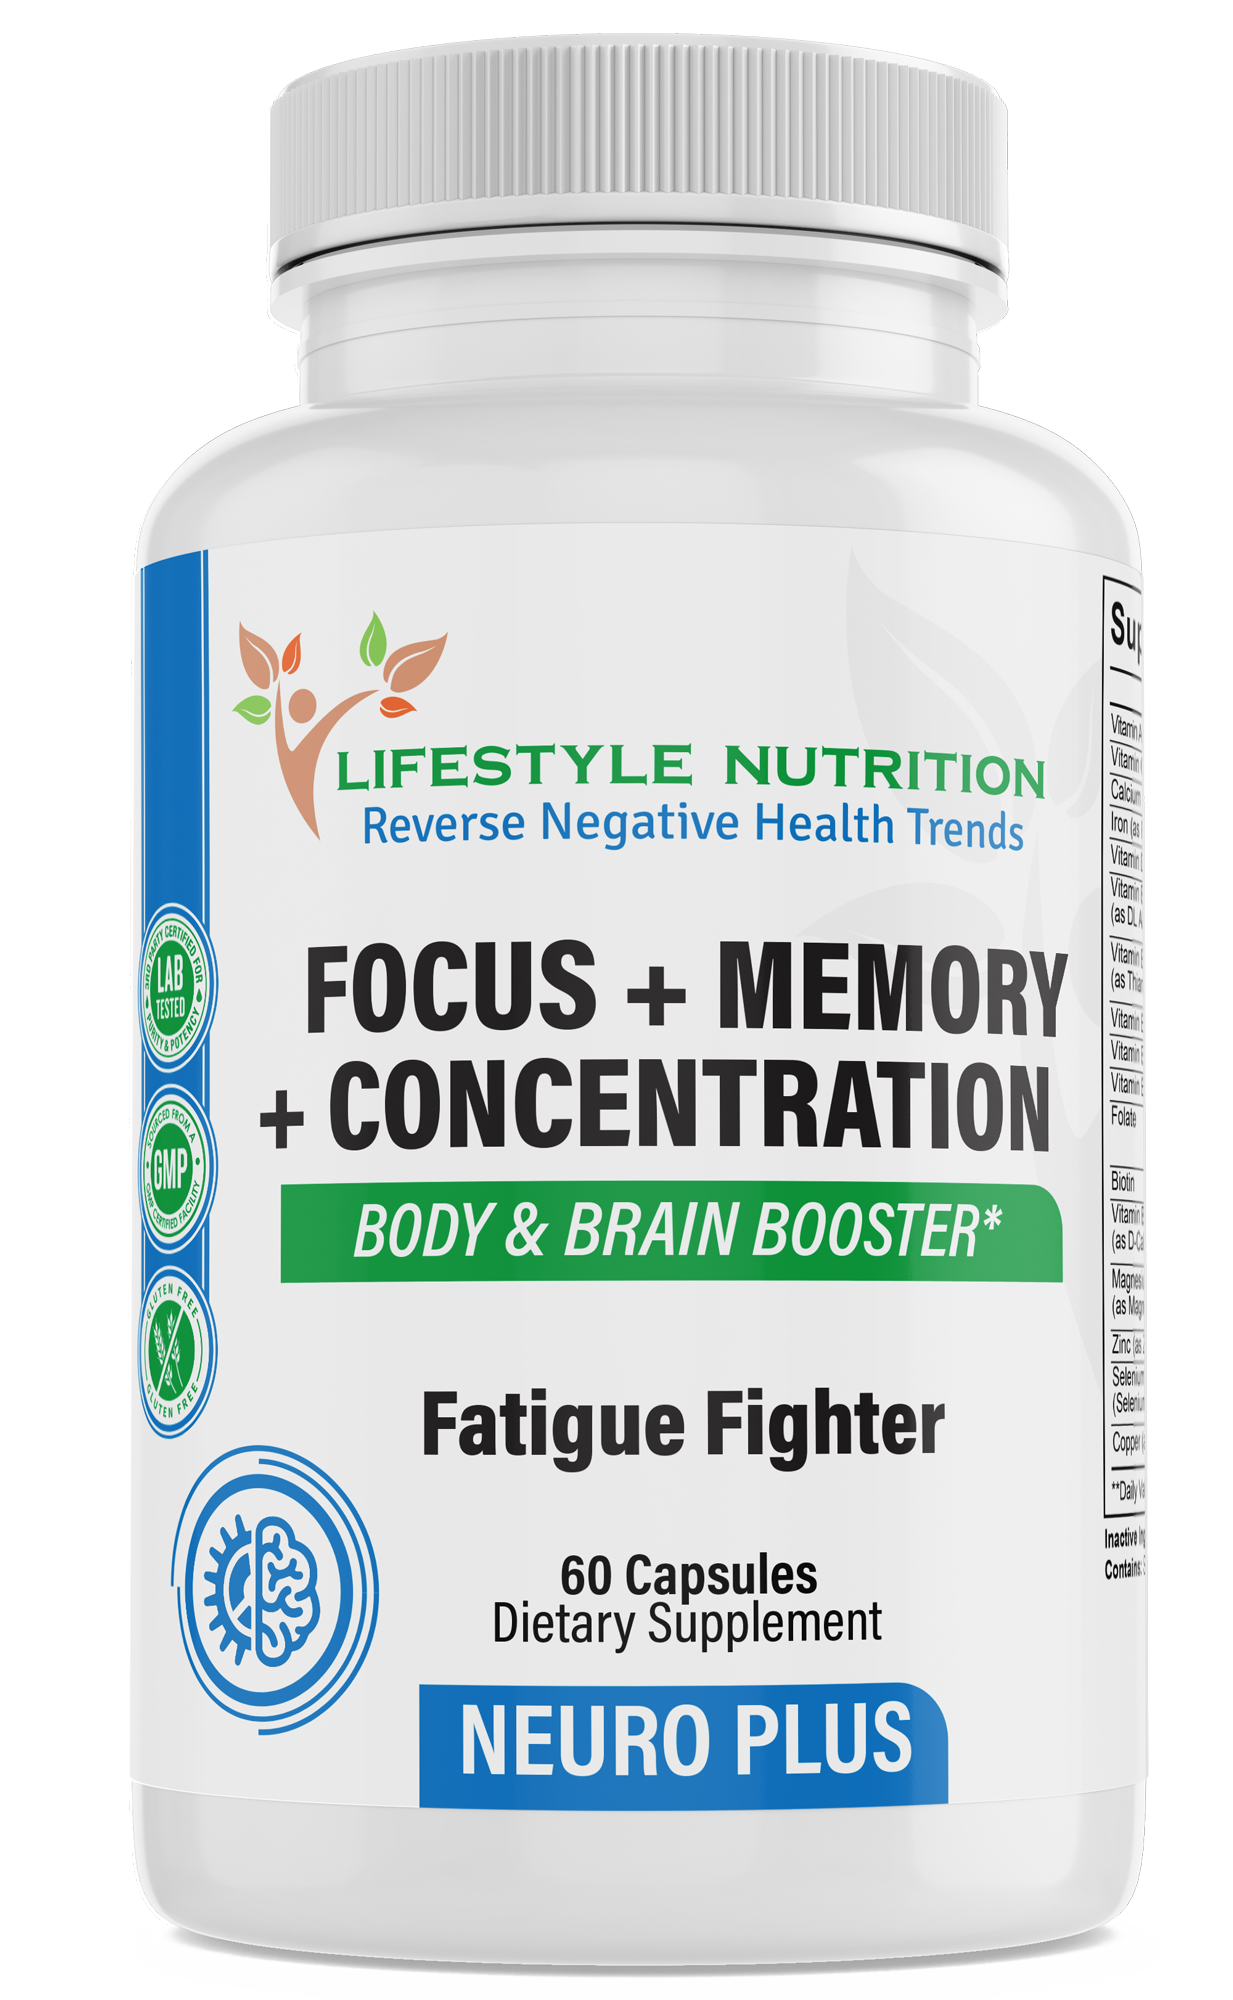 FOCUS + MEMORY + CONCENTRATION (3-Pack)